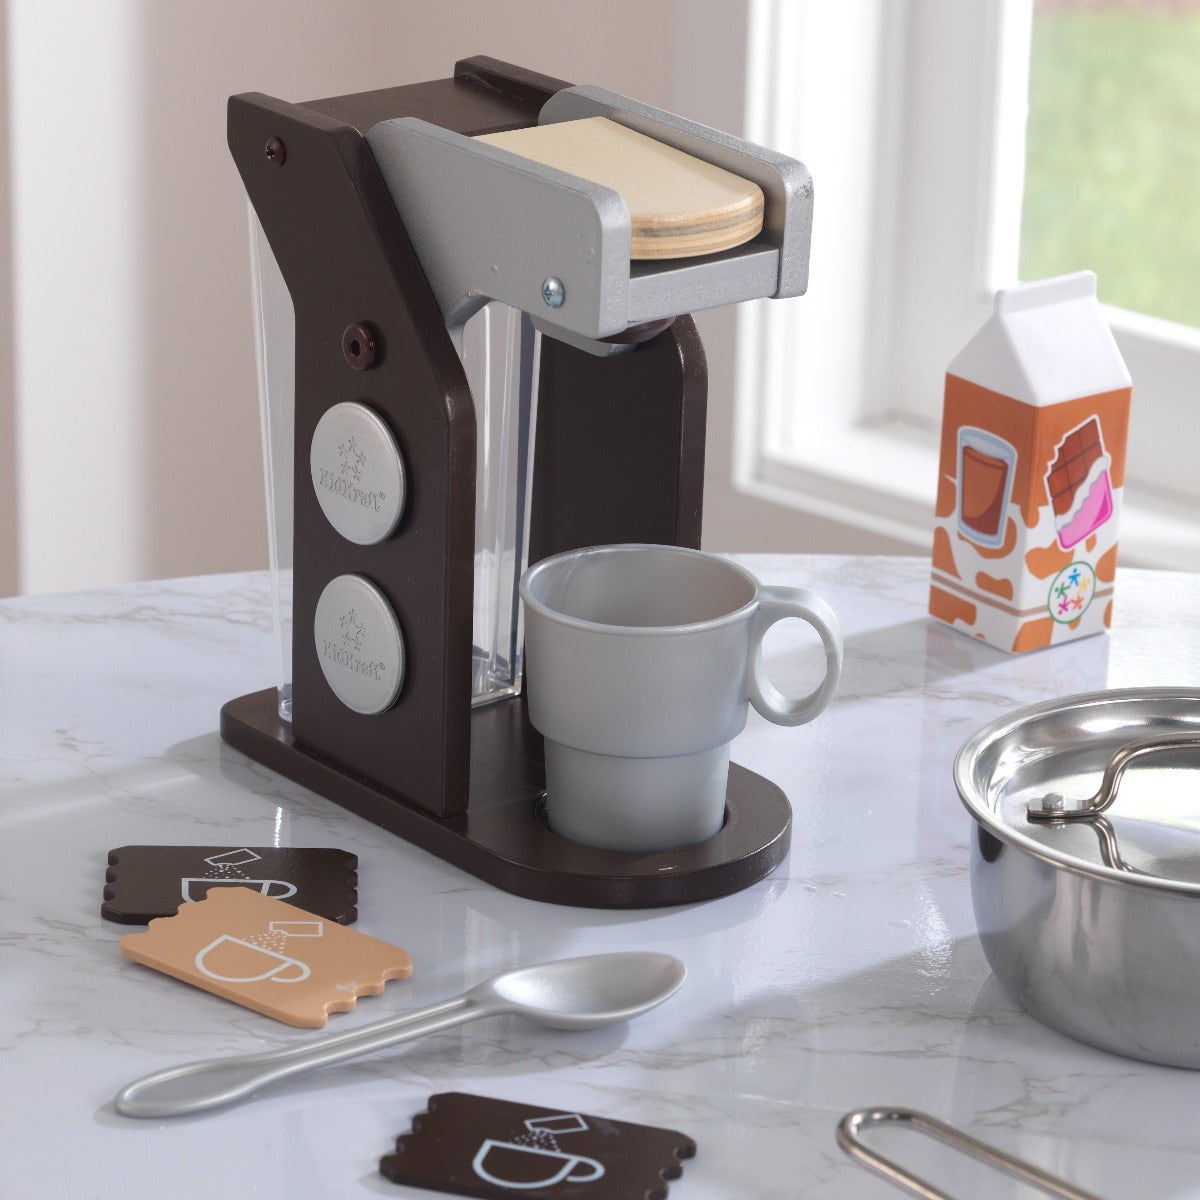 Coffee set includes cup, spoon, sugar packets, milk, and coffee pods